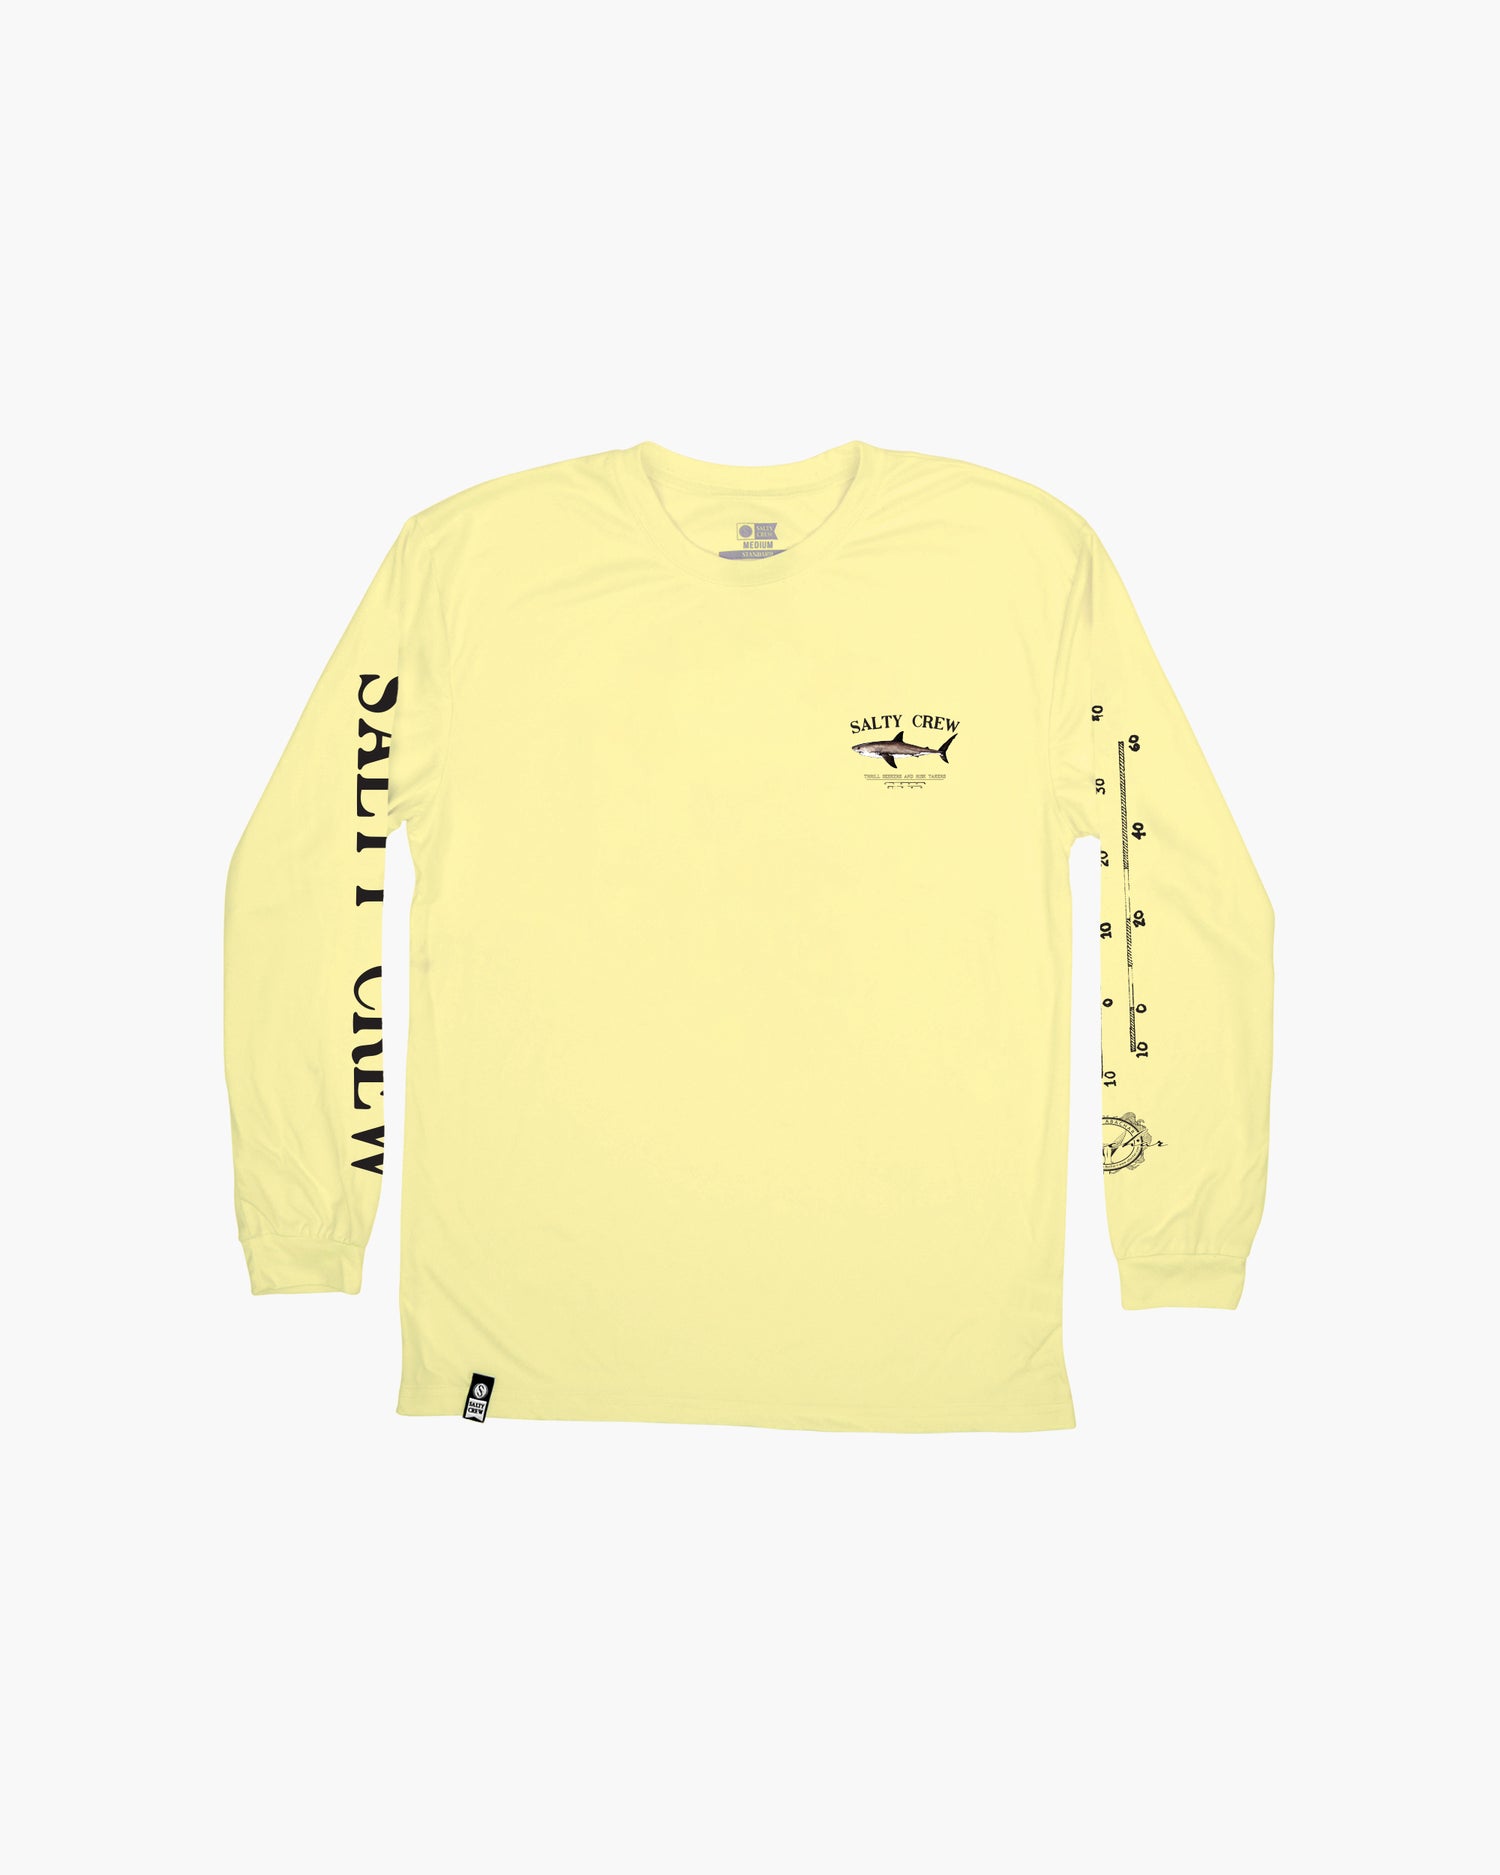 Off body front of Bruce Yellow L/S Sunshirt